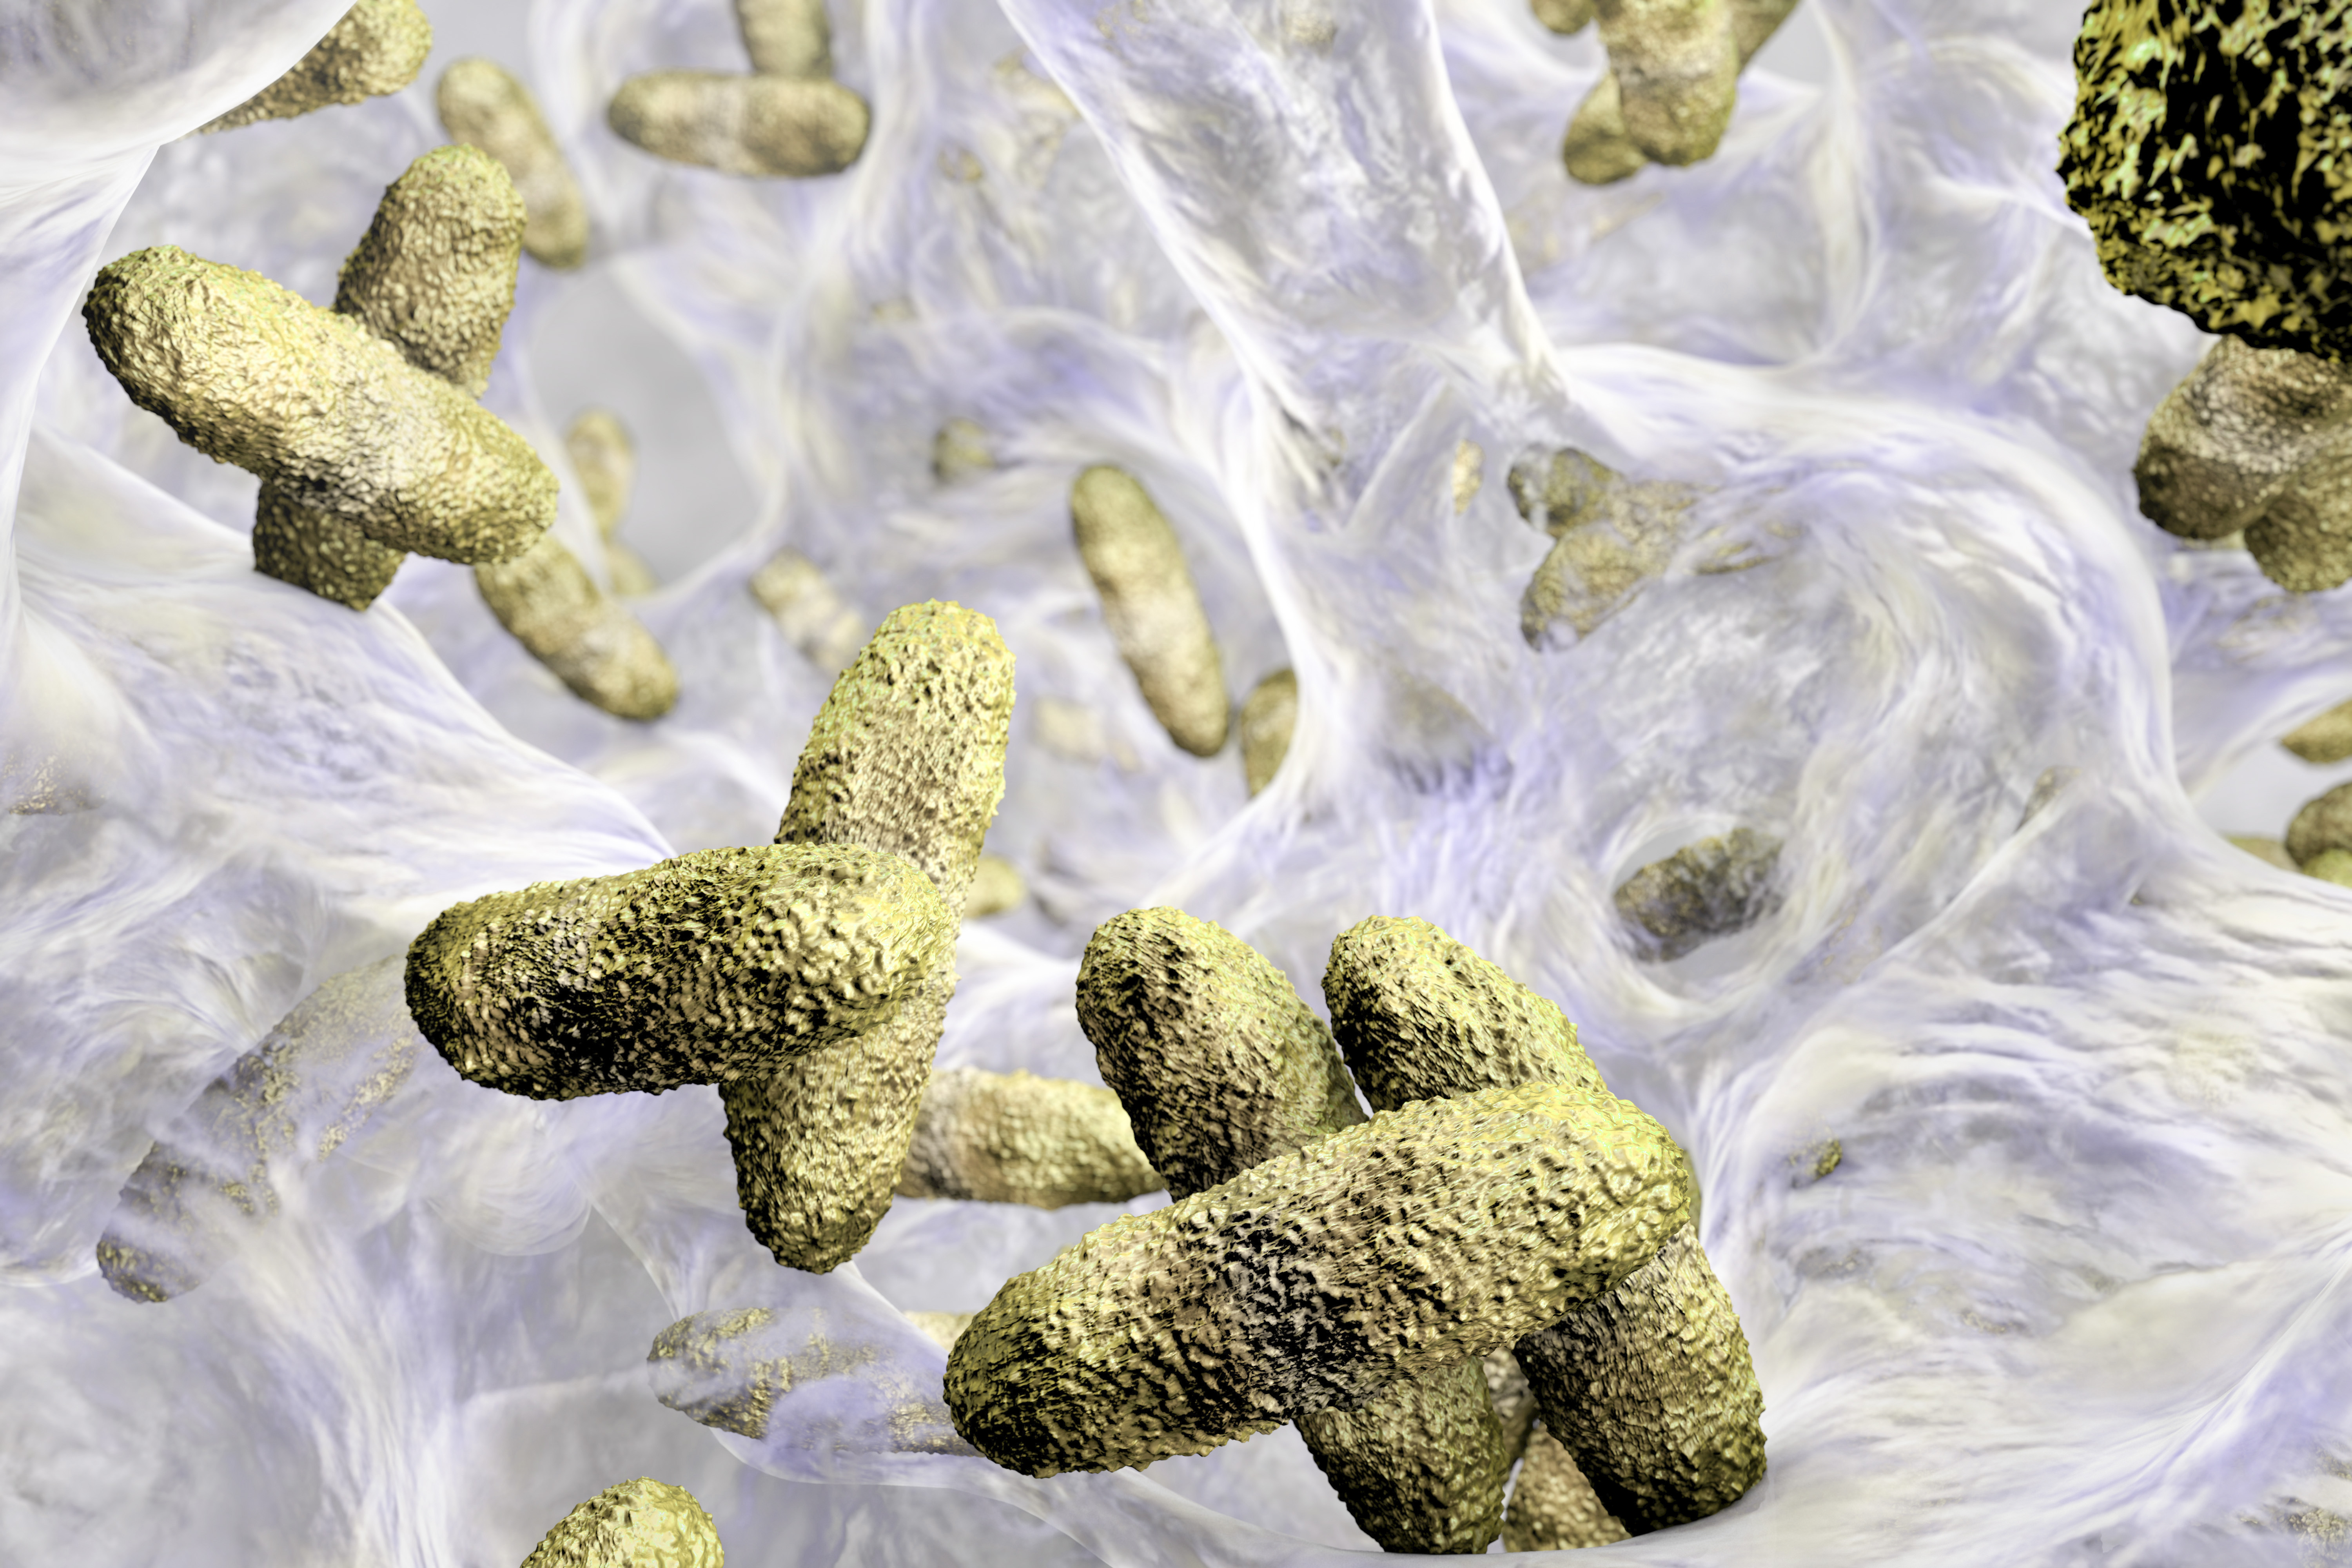 Biofilm containing bacteria Klebsiella, 3D illustration. Gram-negative rod-shaped bacteria which are often nosocomial antibiotic resistant. (Kateryna Kon/Shutterstock)